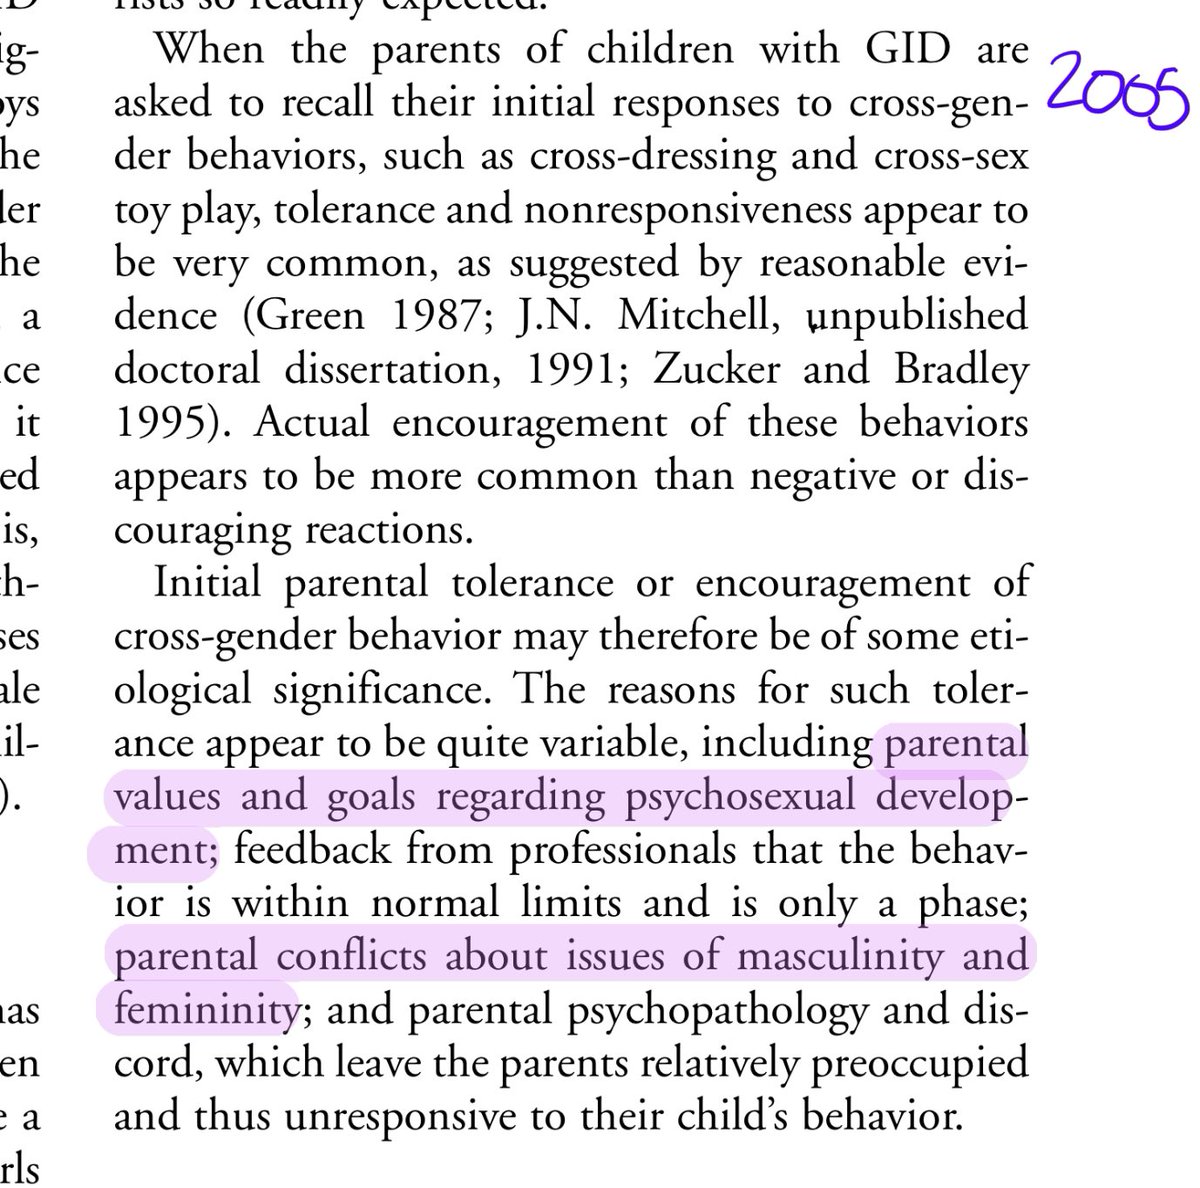 There’s a pervasive blurring of dissenting parental perspectives with parental pathology and it’s really troubling